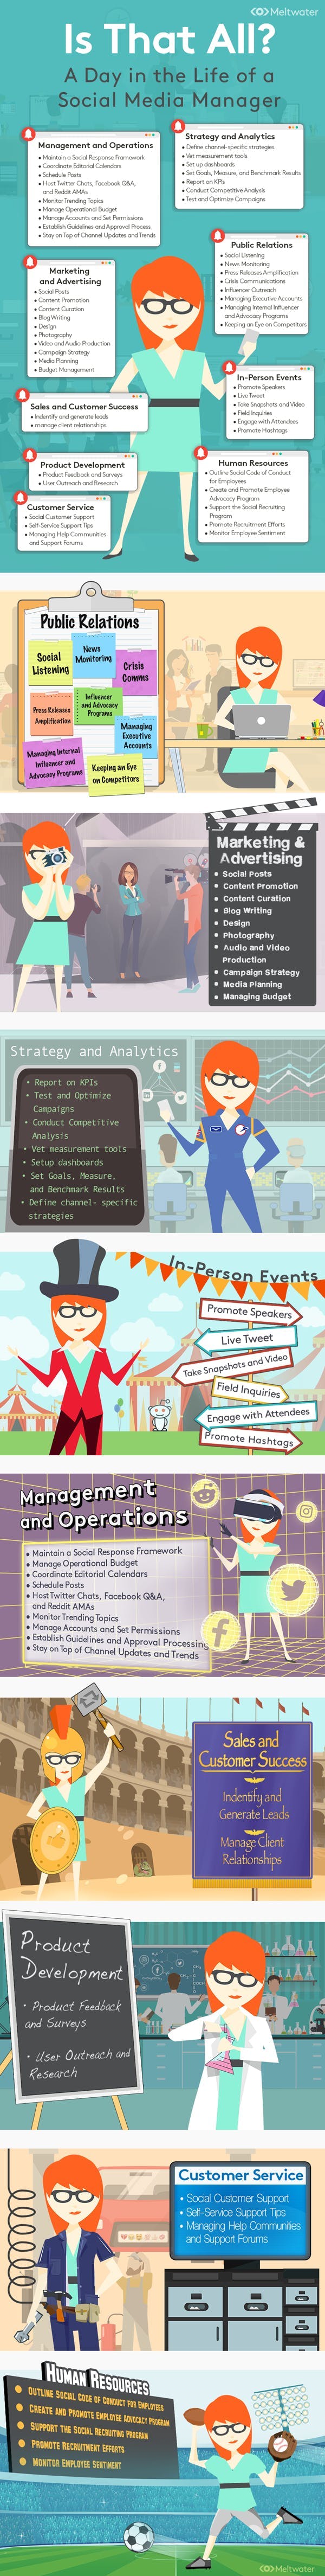 Infographic: Is that all? What a social media manager does